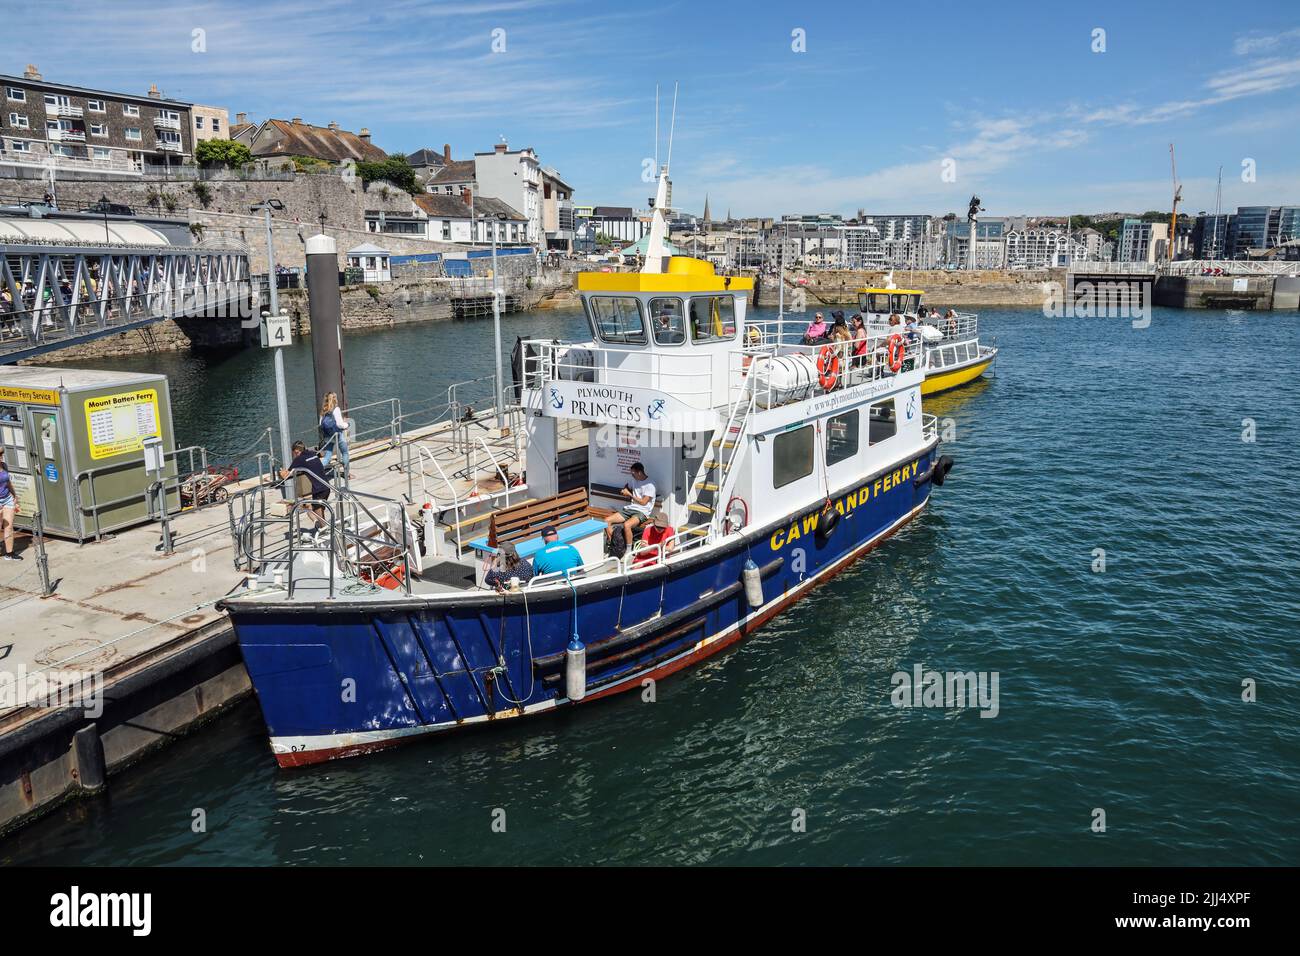 The Plymouth Princess, Cawsand Ferry berthed at the Barbican Pontoon, Plymouth. During the summer months the Cawsand Ferry makes regular trips from Pl Stock Photo